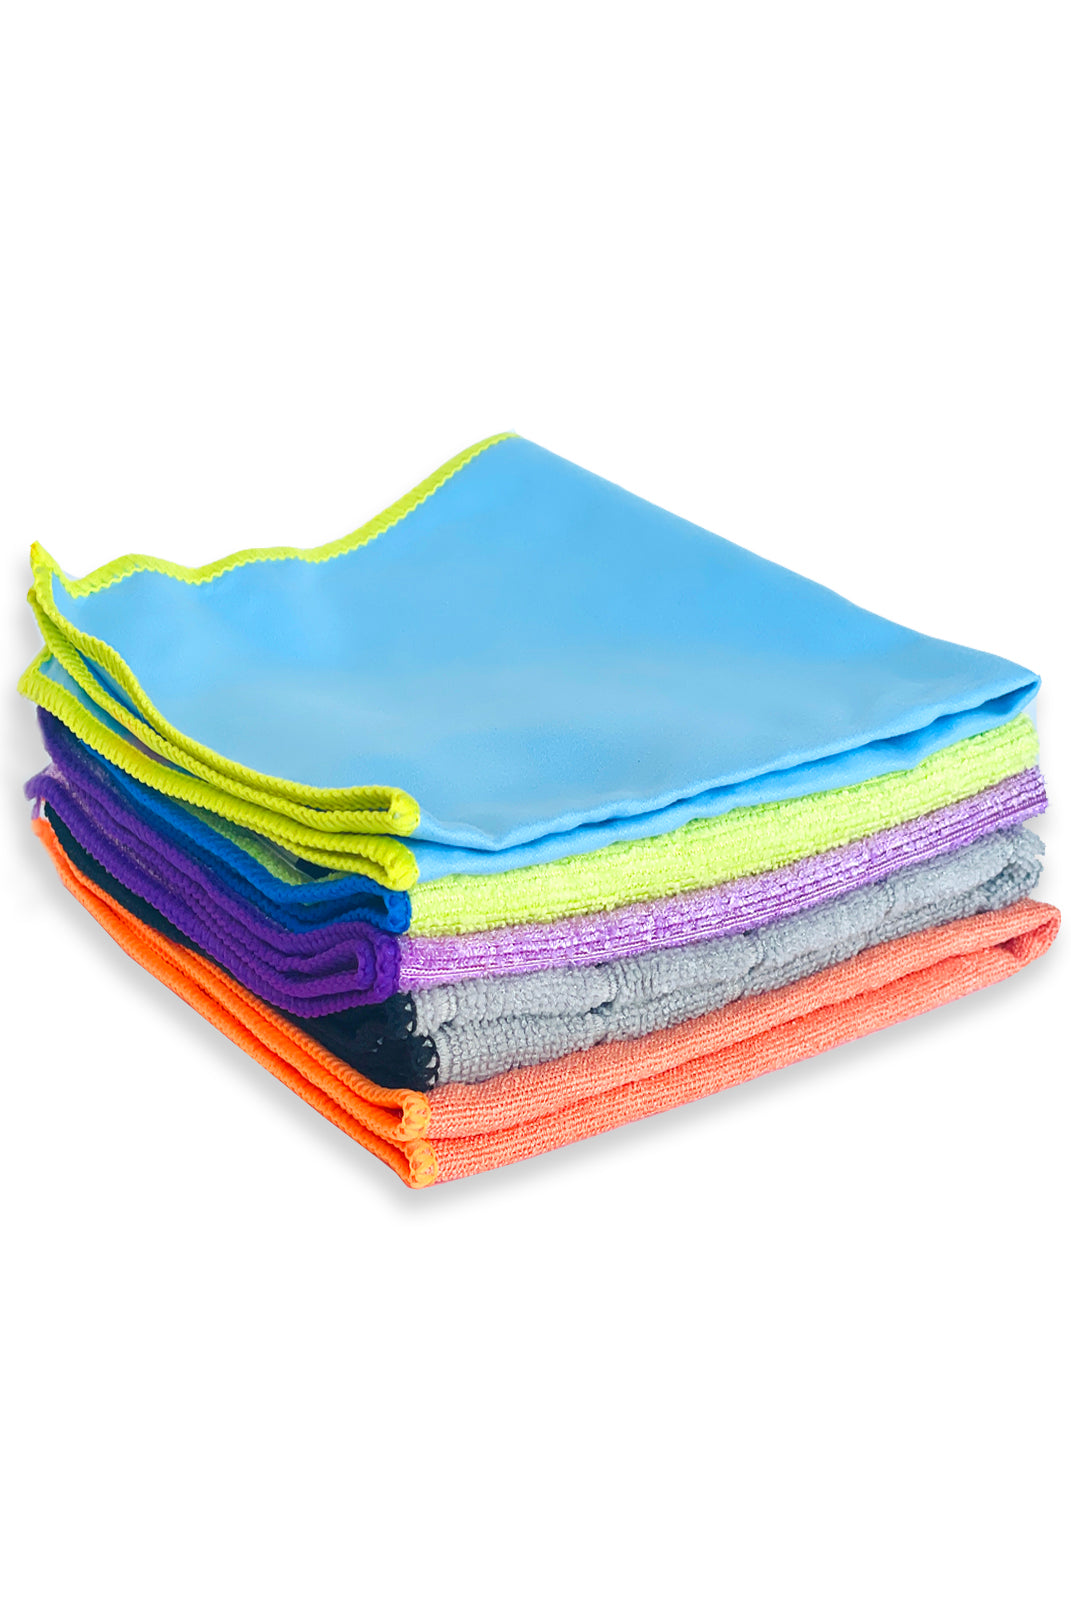 Reusable Microfiber Cleaning Cloths, 5ct –